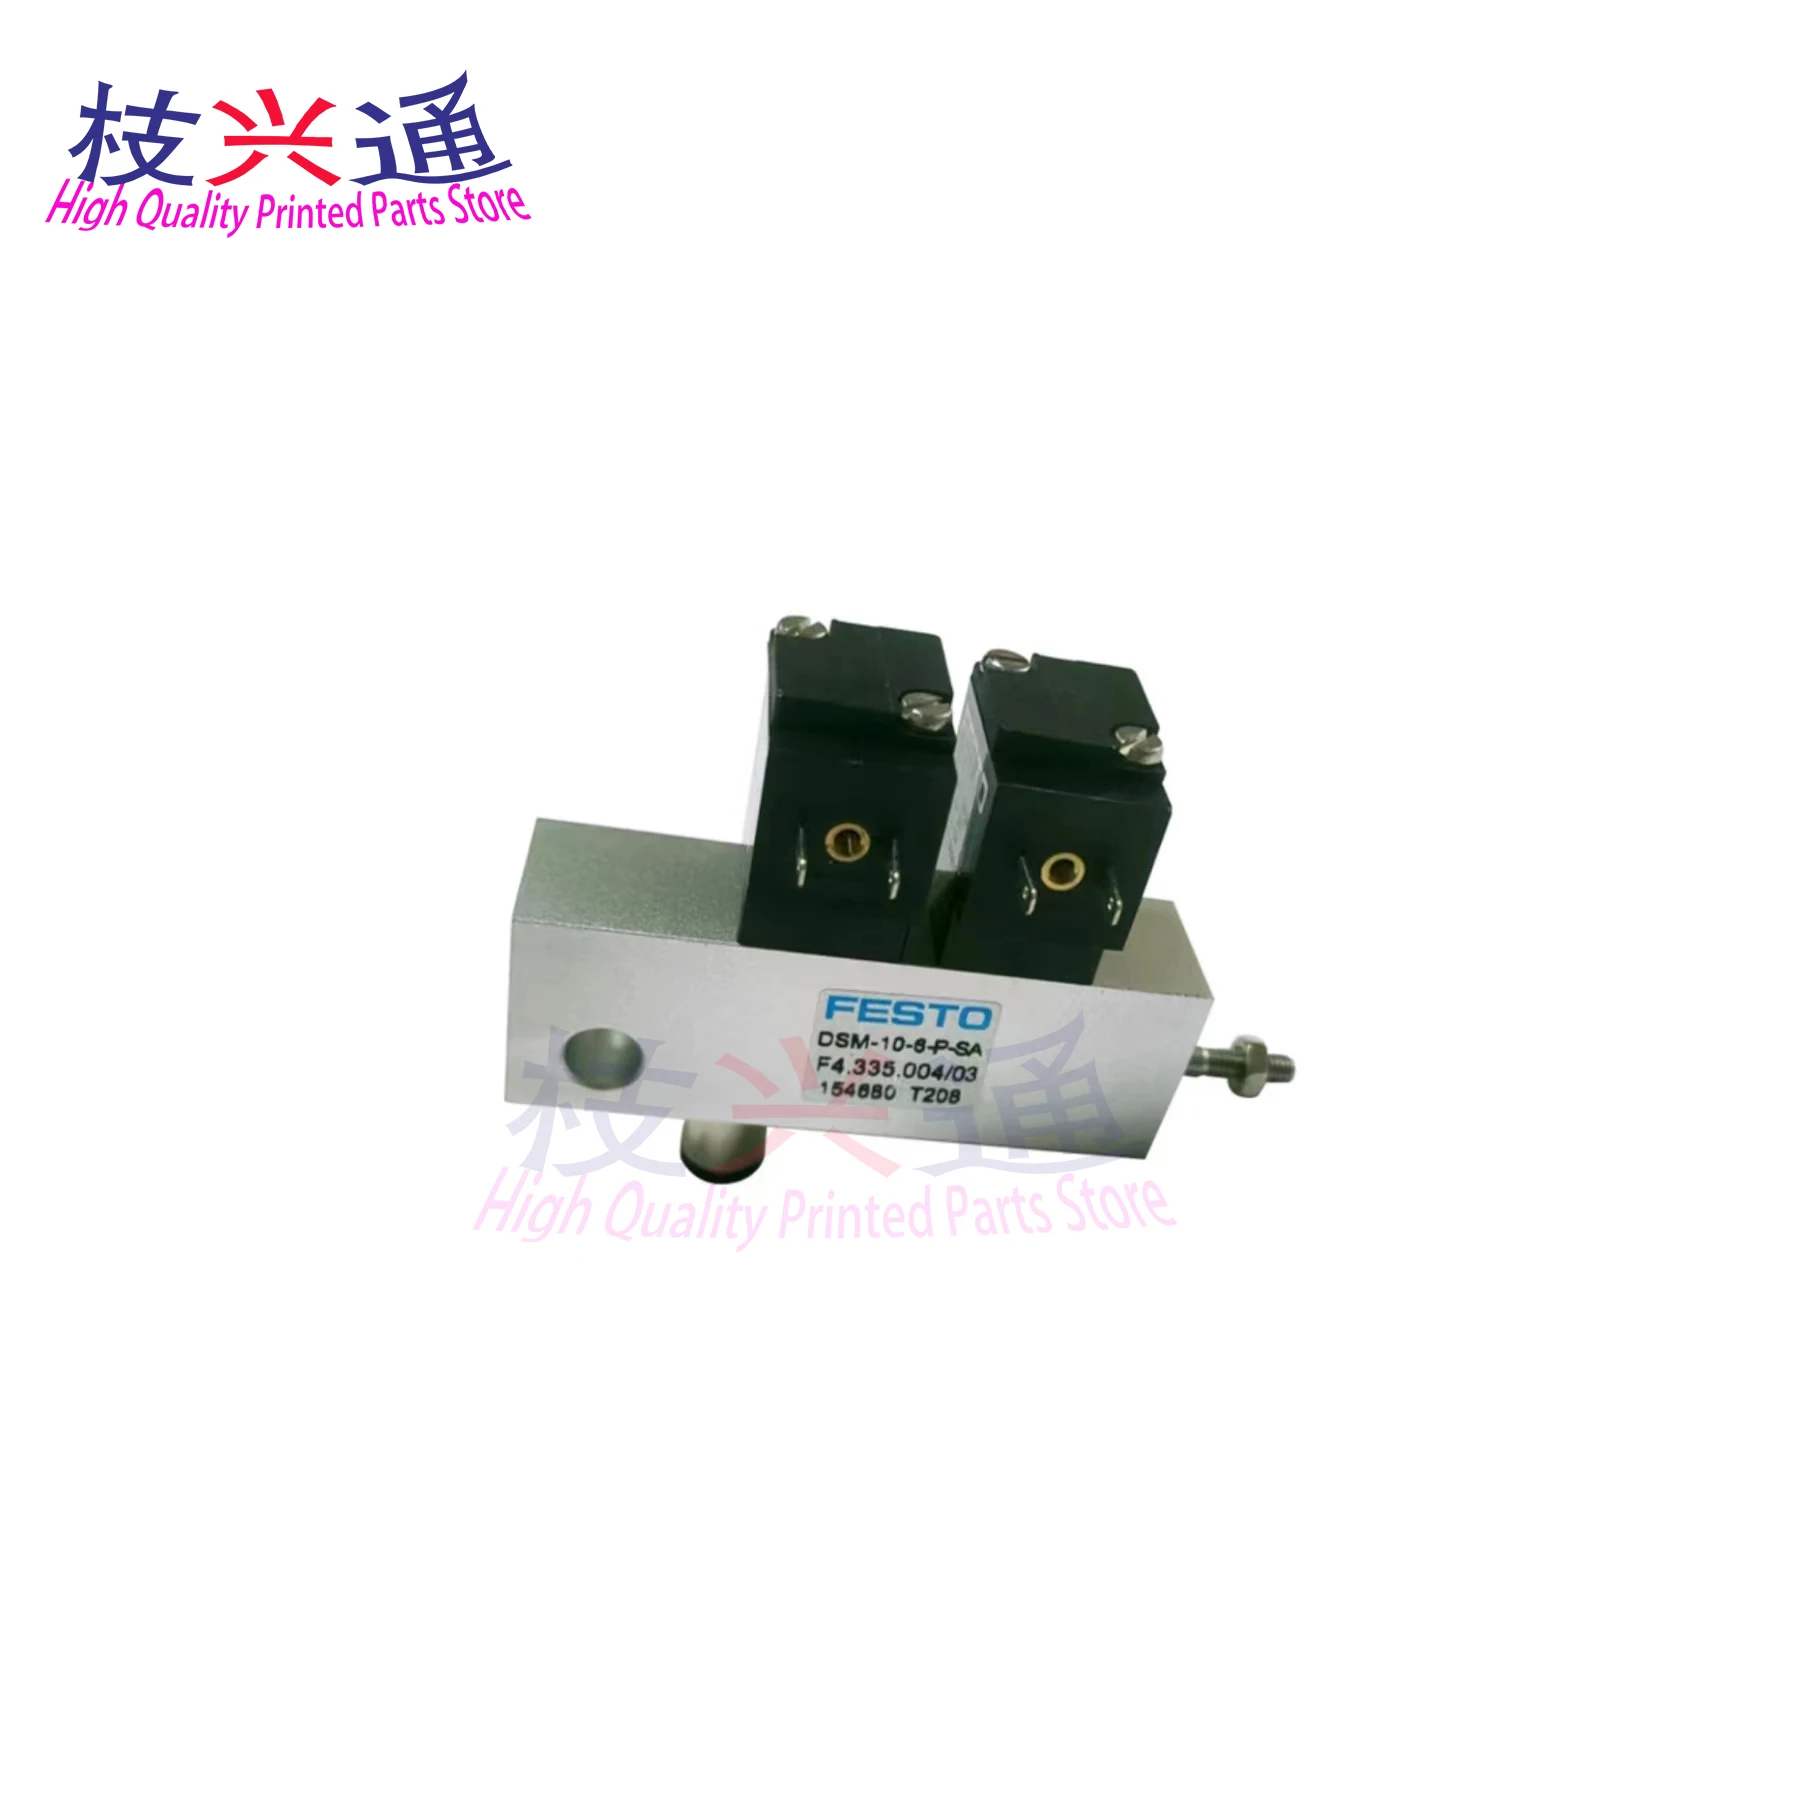 

F4.335.004 Double coil solenoid valve cylinder suitable for Heidelberg SM74, SM102, CD102 accessories